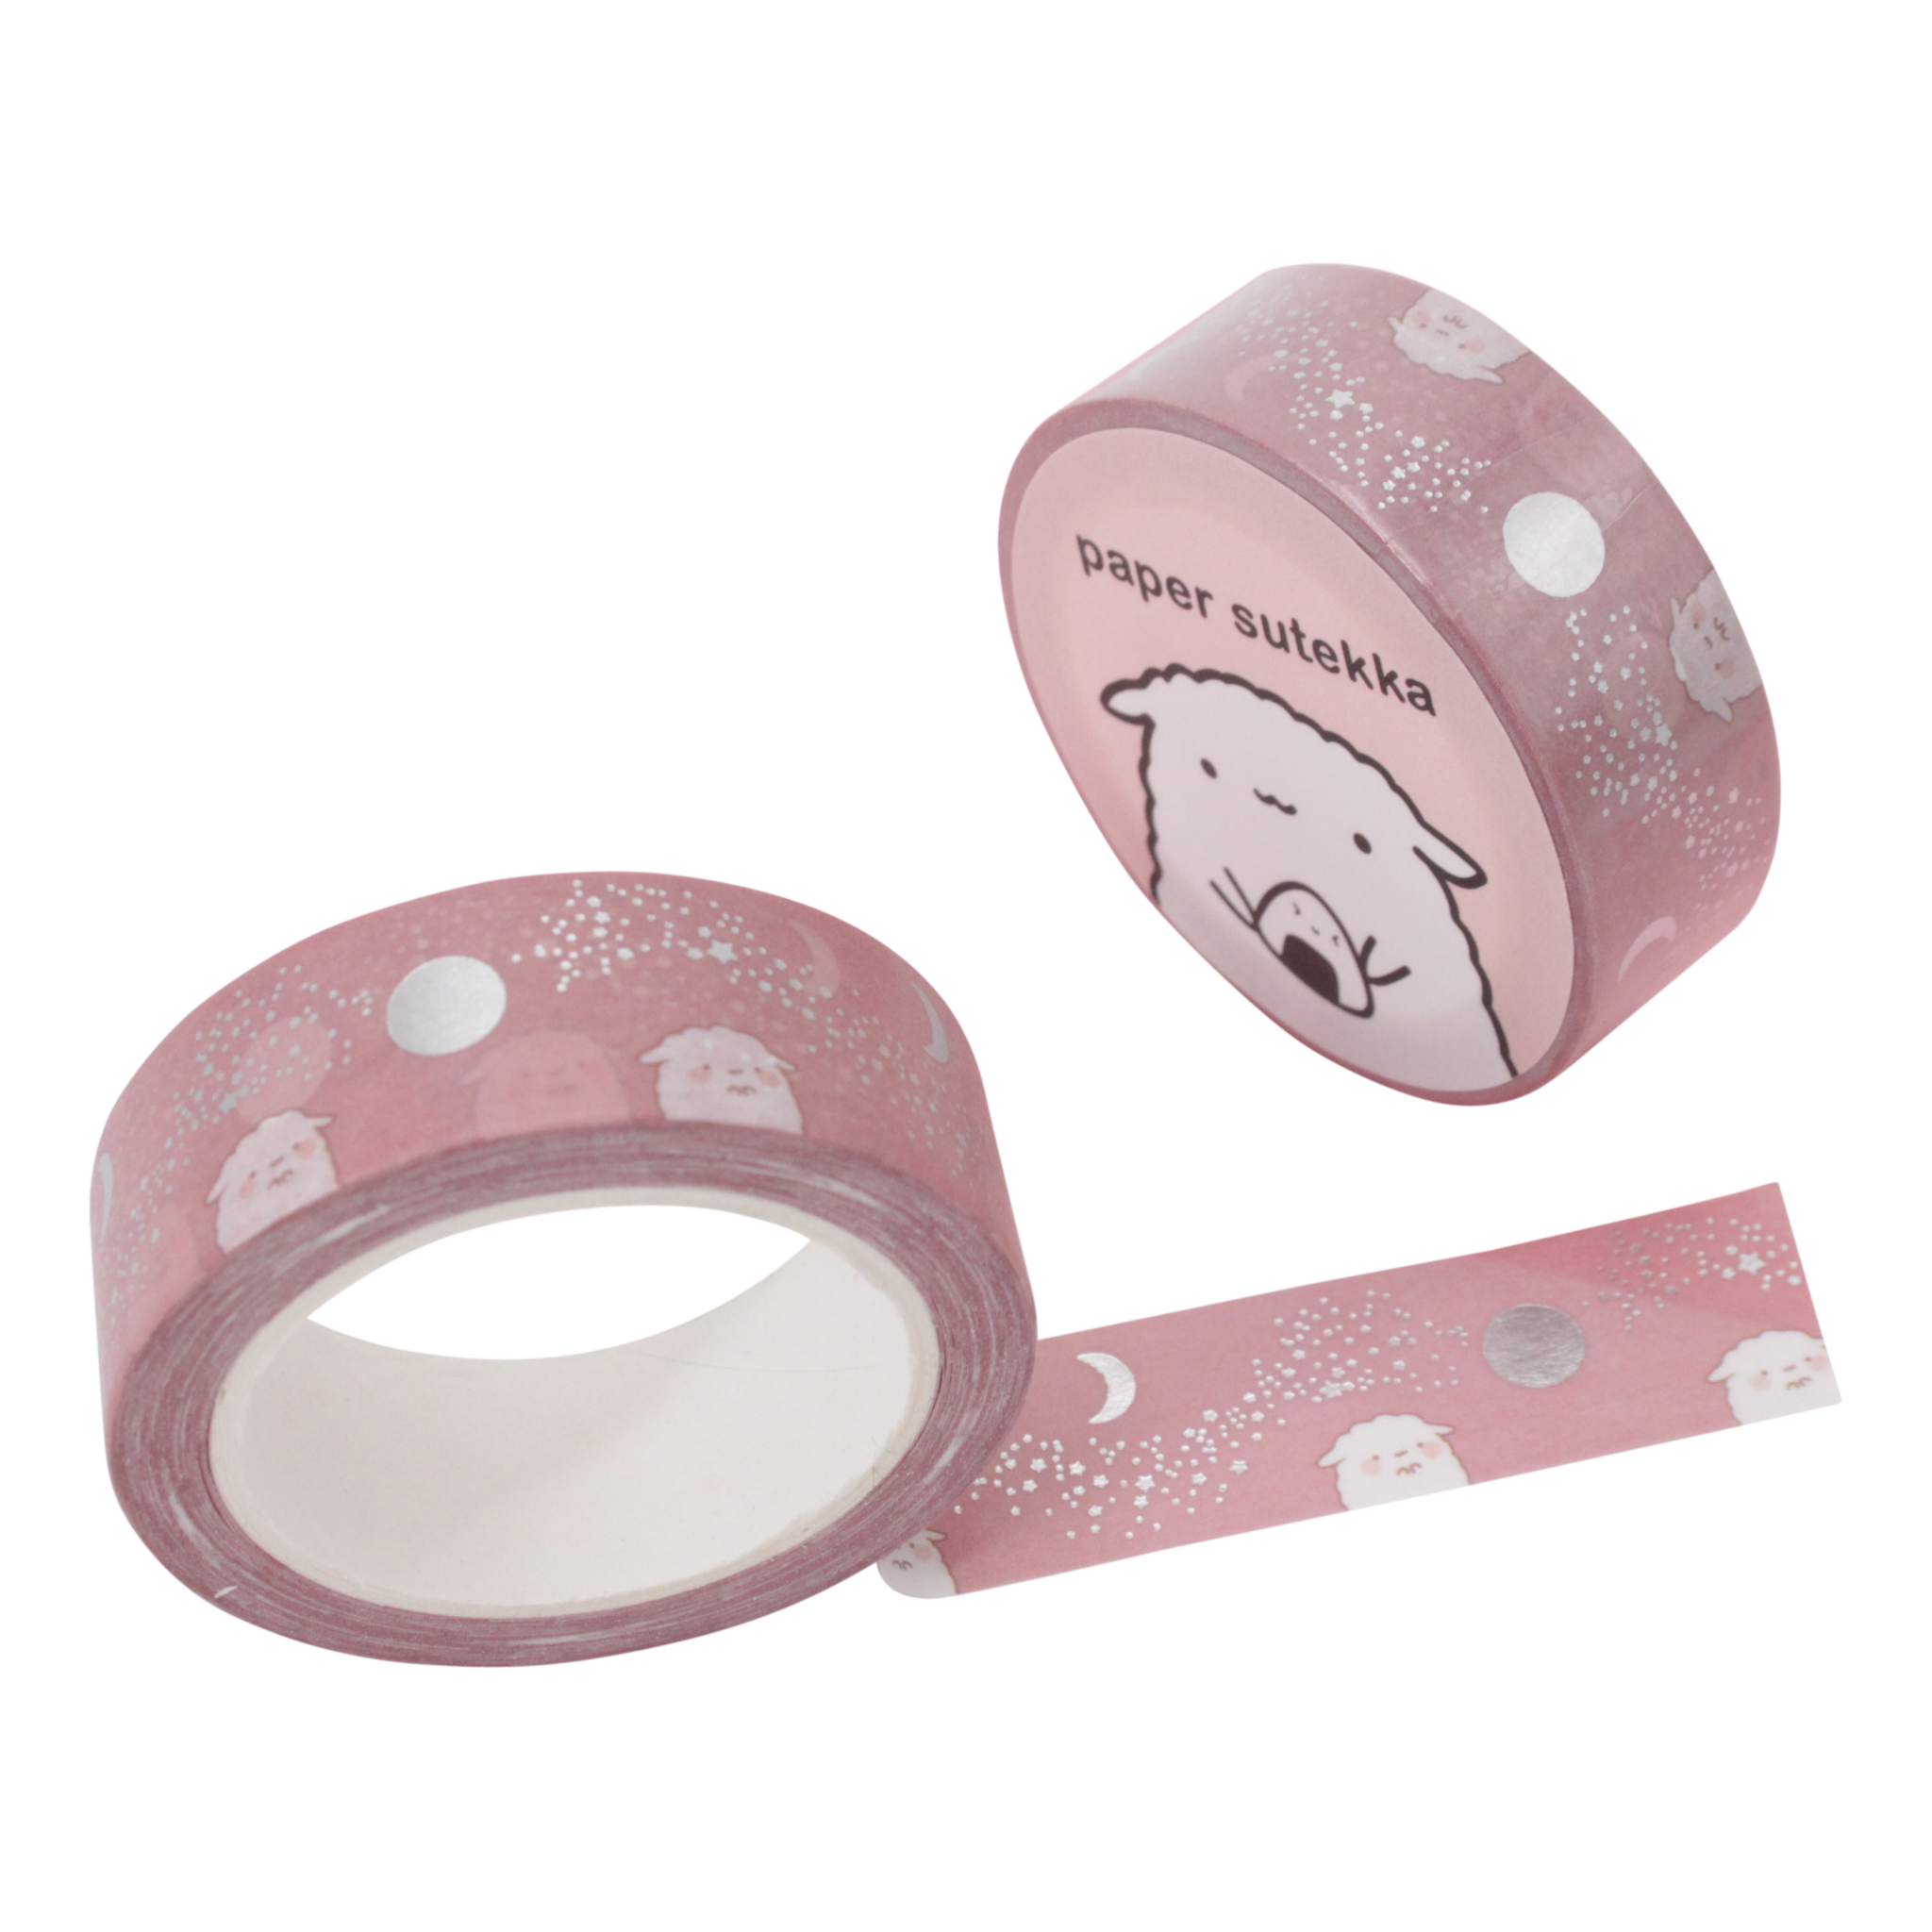 Paper Sutekka Washi Tape Dusty Rose Stardust and Moon Mika Silver Foil